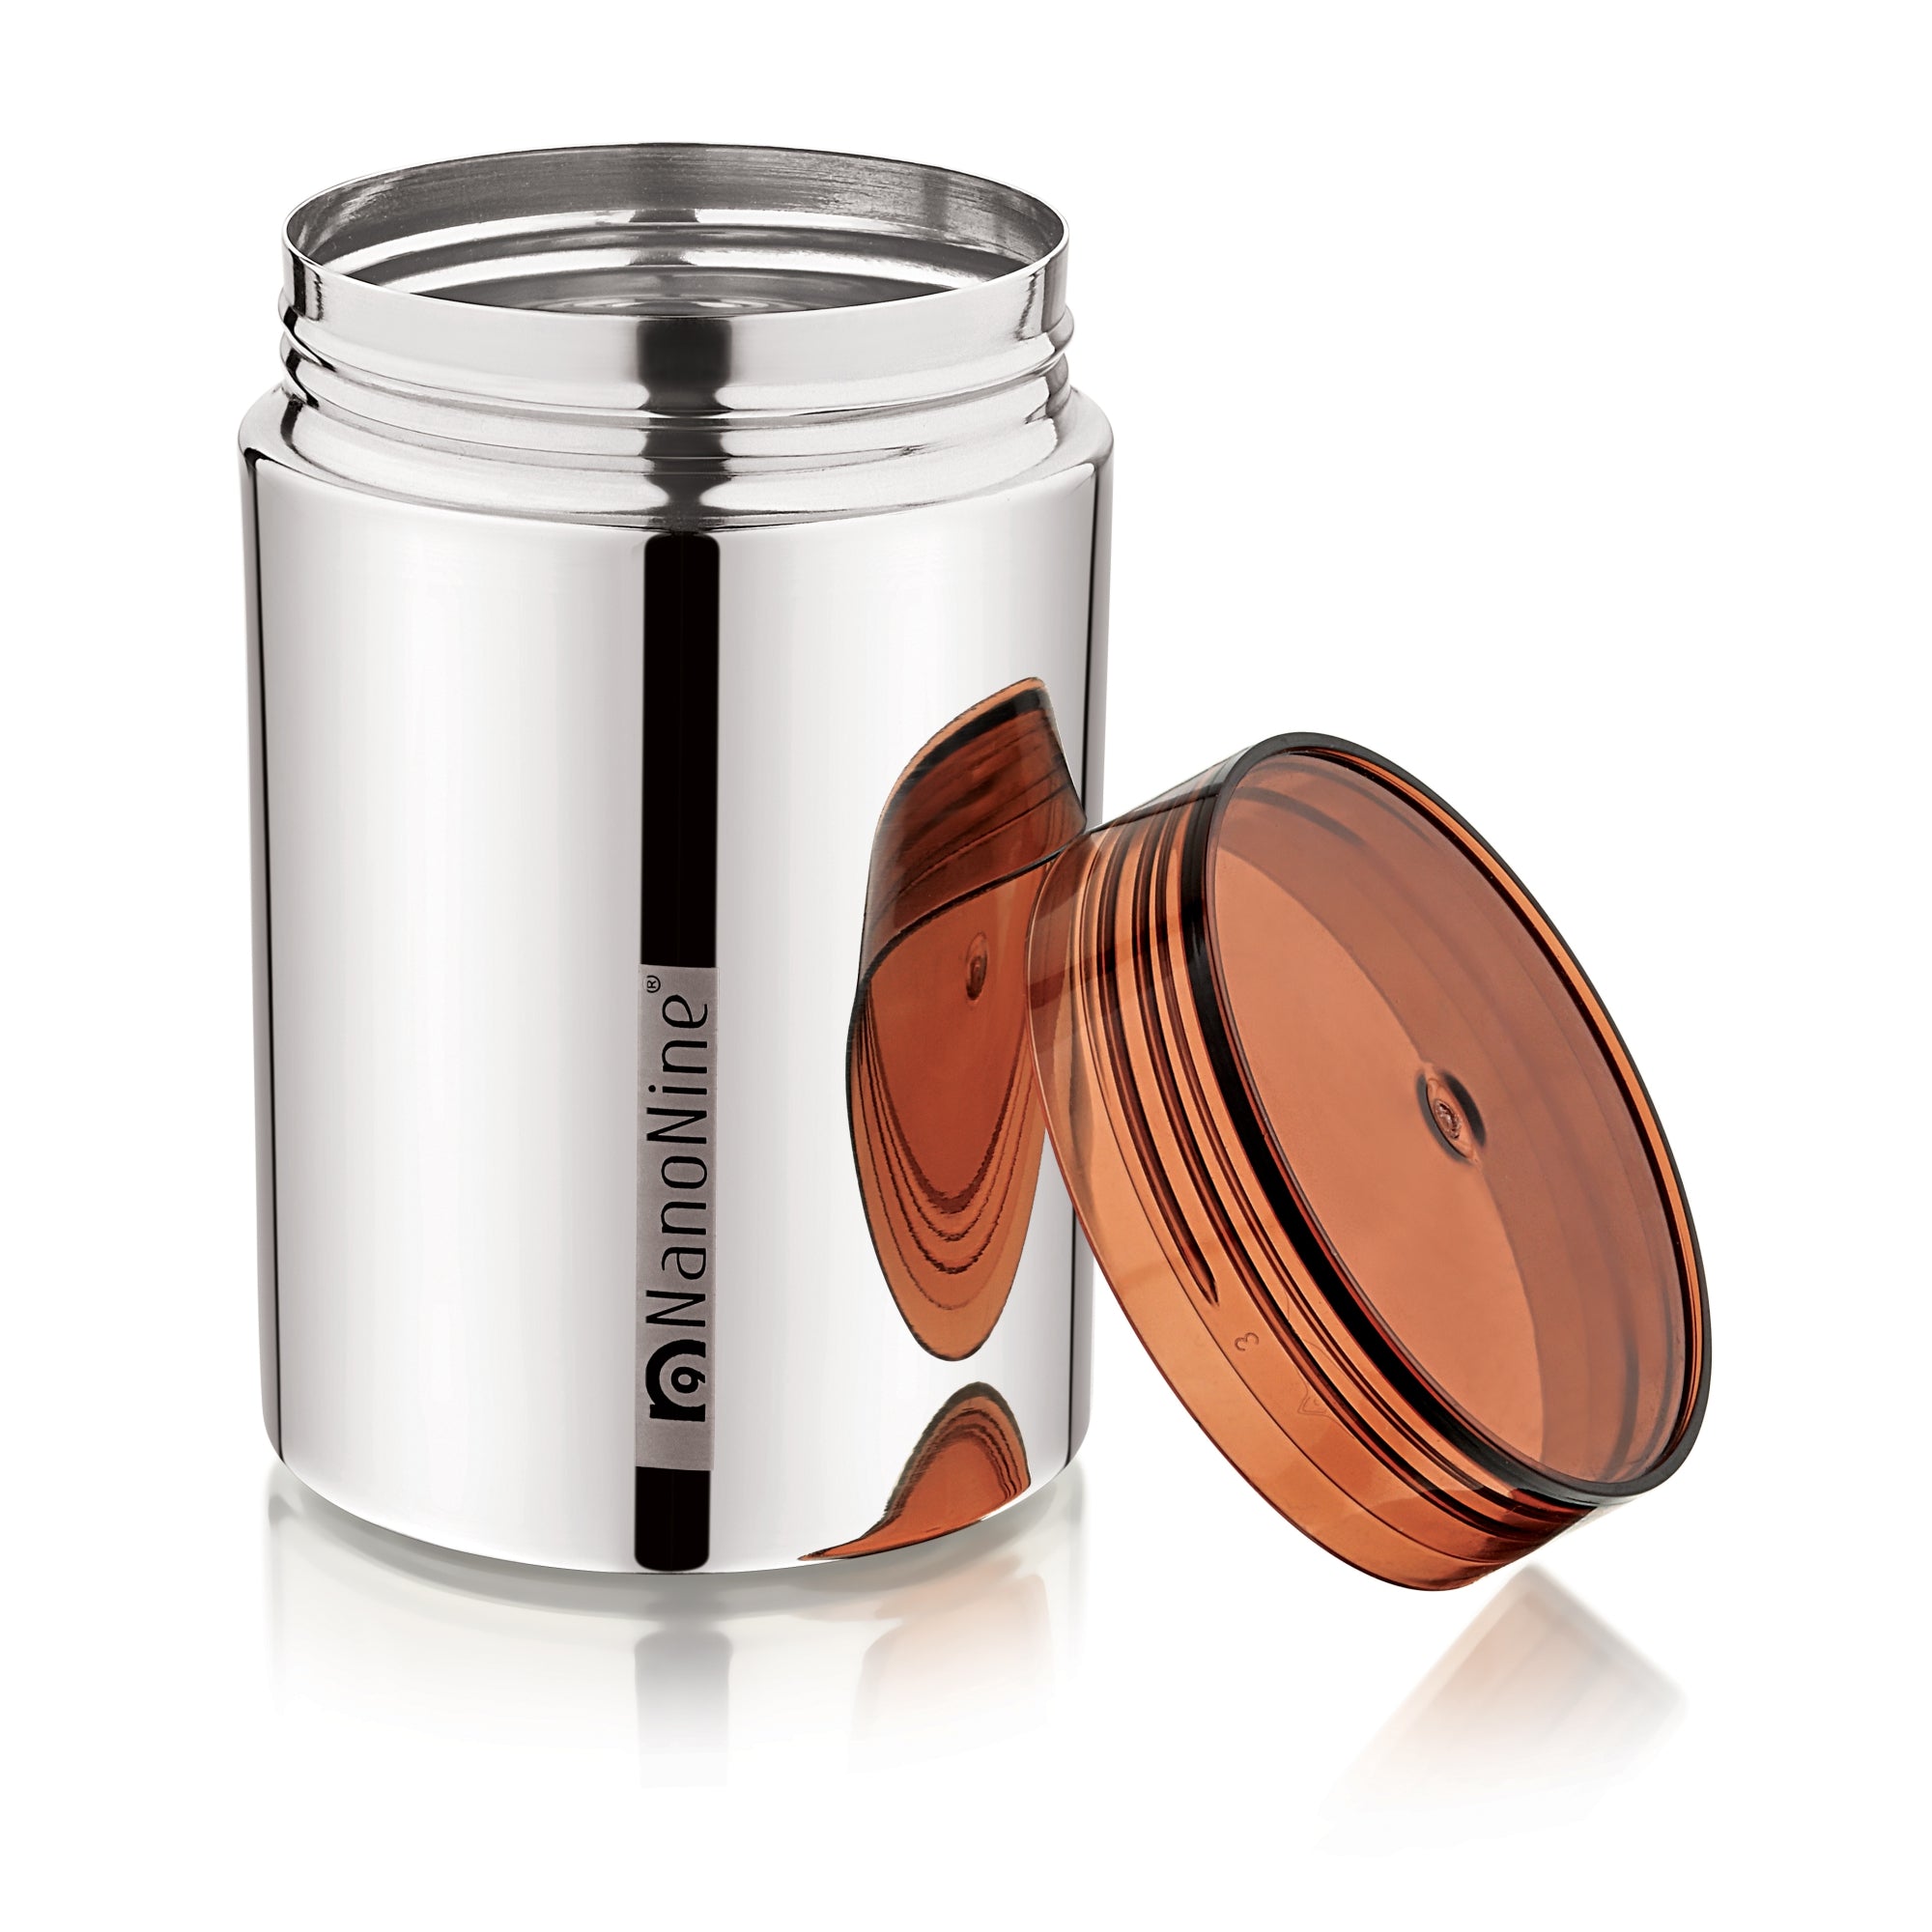 NanoNine Canistore 700 ml x 2 Single Wall Stainless Steel Single Storage Container.